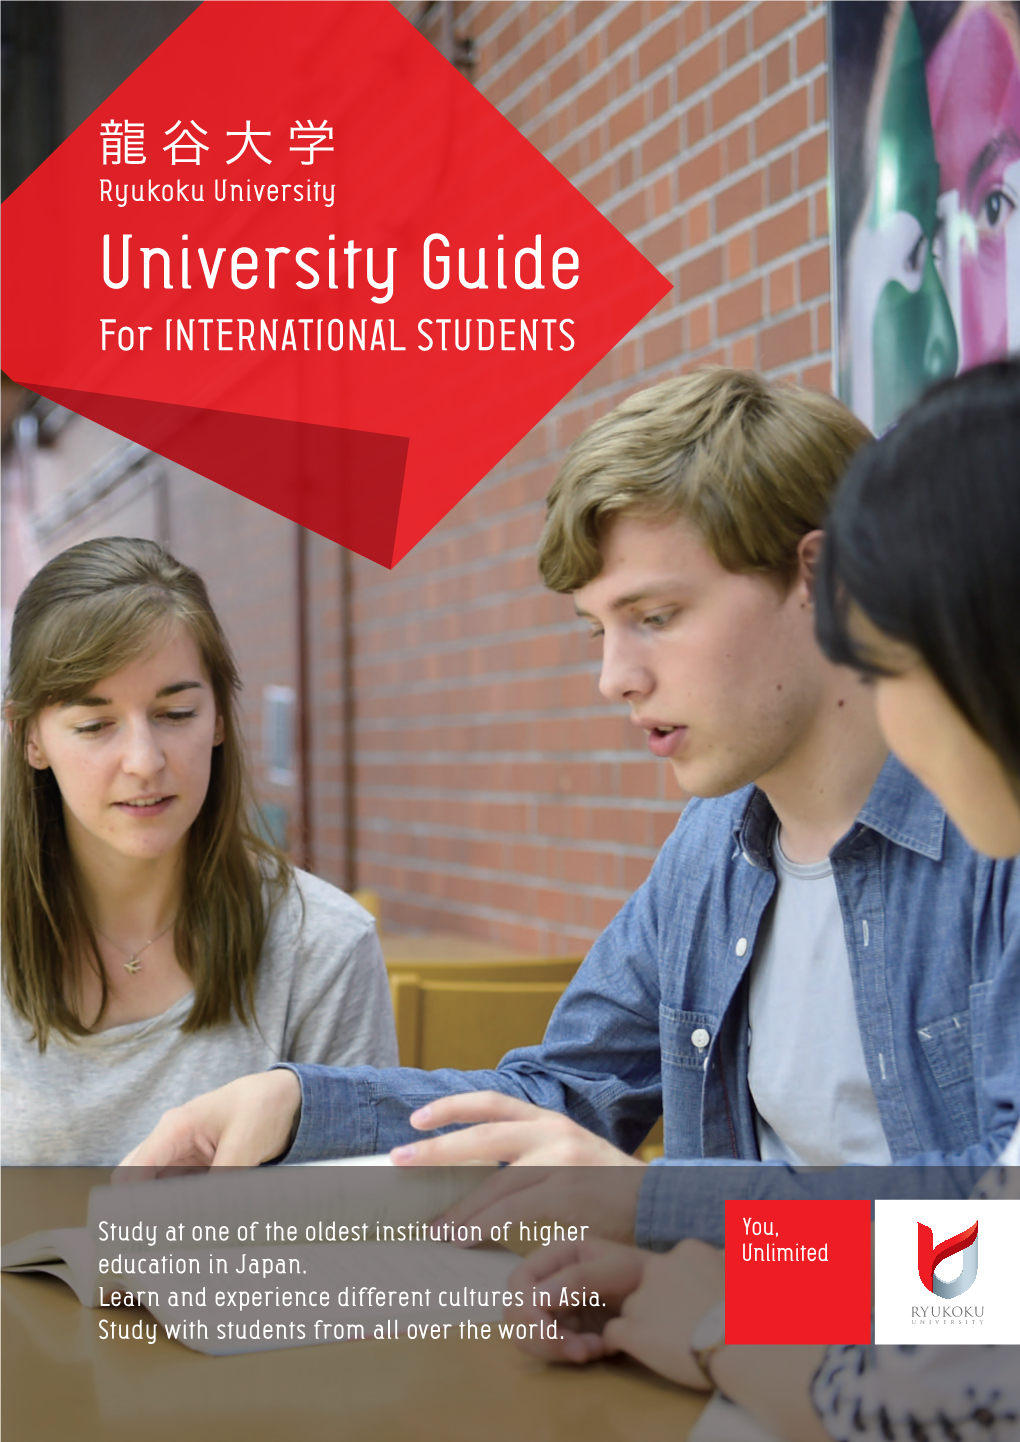 University Guide for INTERNATIONAL STUDENTS